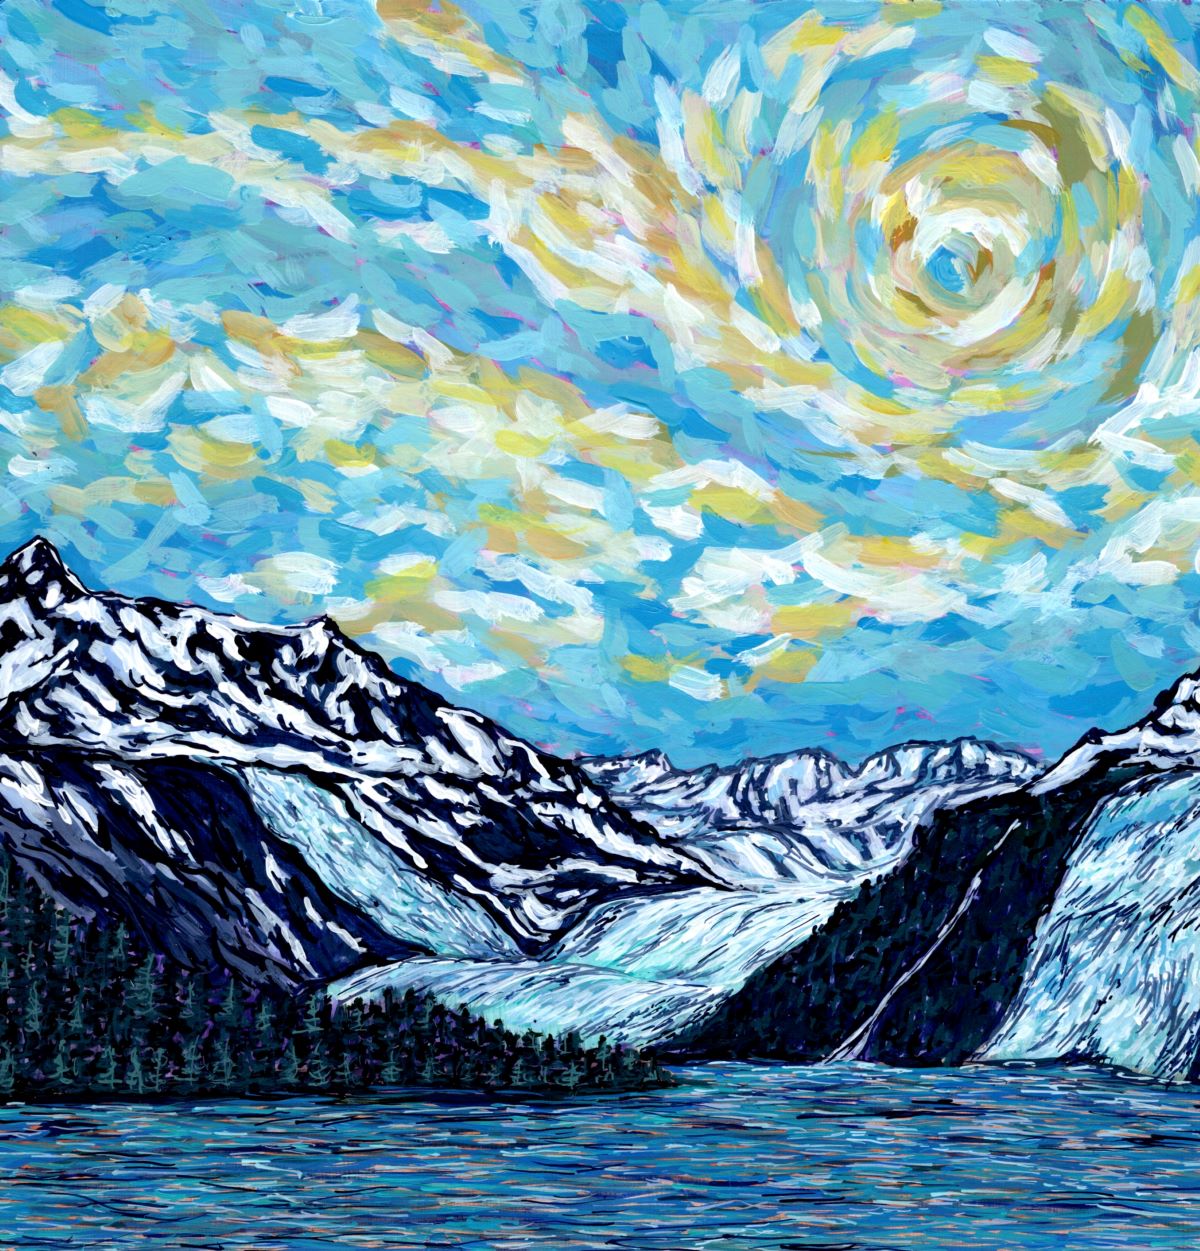 An acrylic painting by Jamie Barks of a glacier in impressionist style.